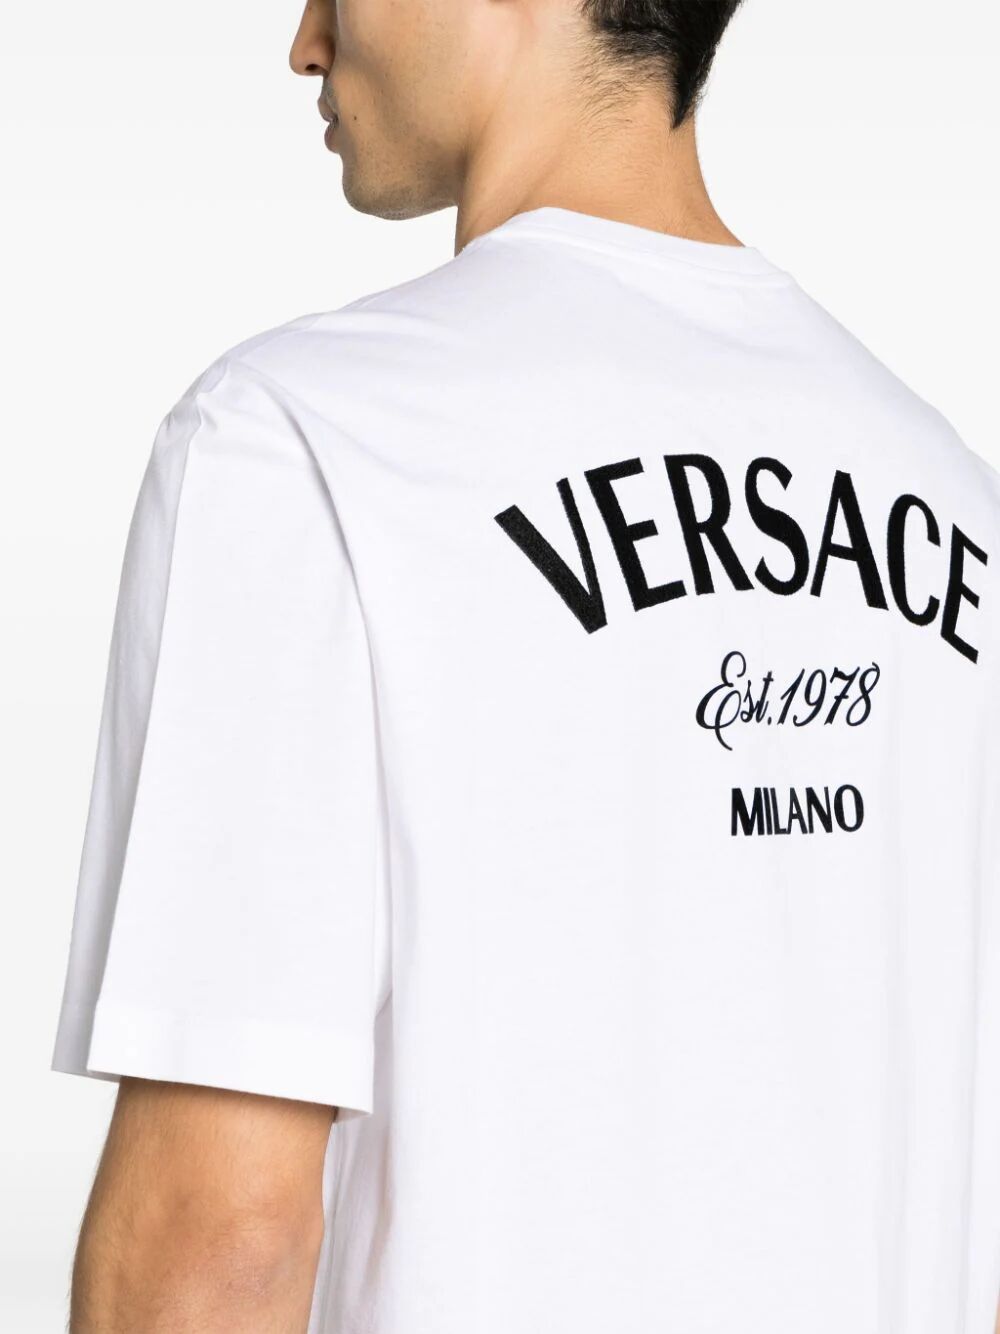 T-shirt Jersey Fabric Versace Embroidery Versace Milano Stamp Print